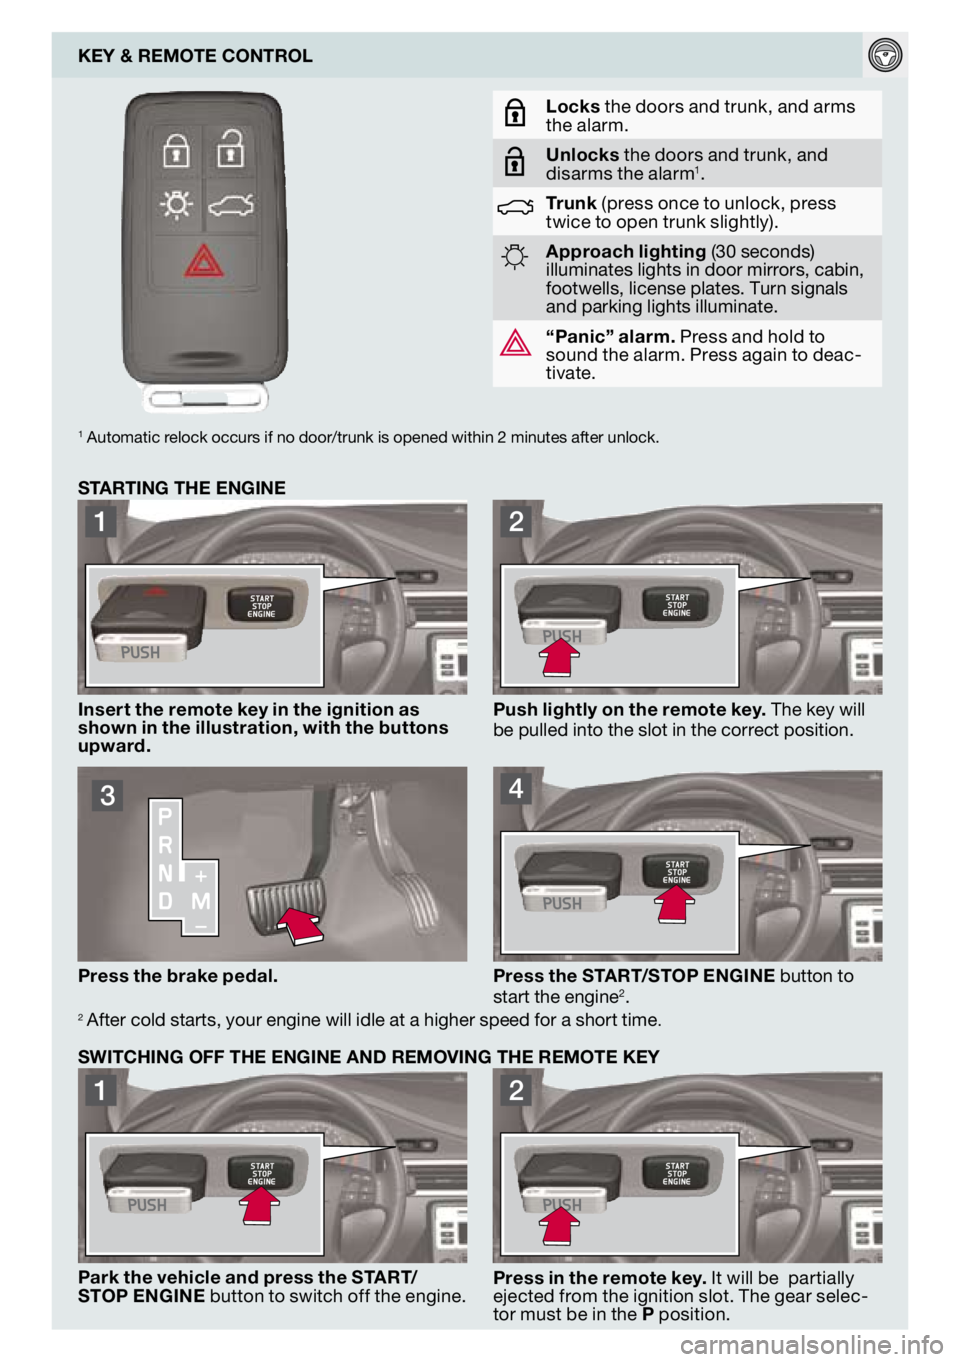 VOLVO S80 2009  Quick Guide 
1
2

3
4

1
2

KEY & REMOTE CONTROL
Locks the doors and trunk, and arms the alarm.
Unlocks the doors and trunk, and disarms the alarm1.
Trunk (press once to unlock, press twice to open trunk slightly